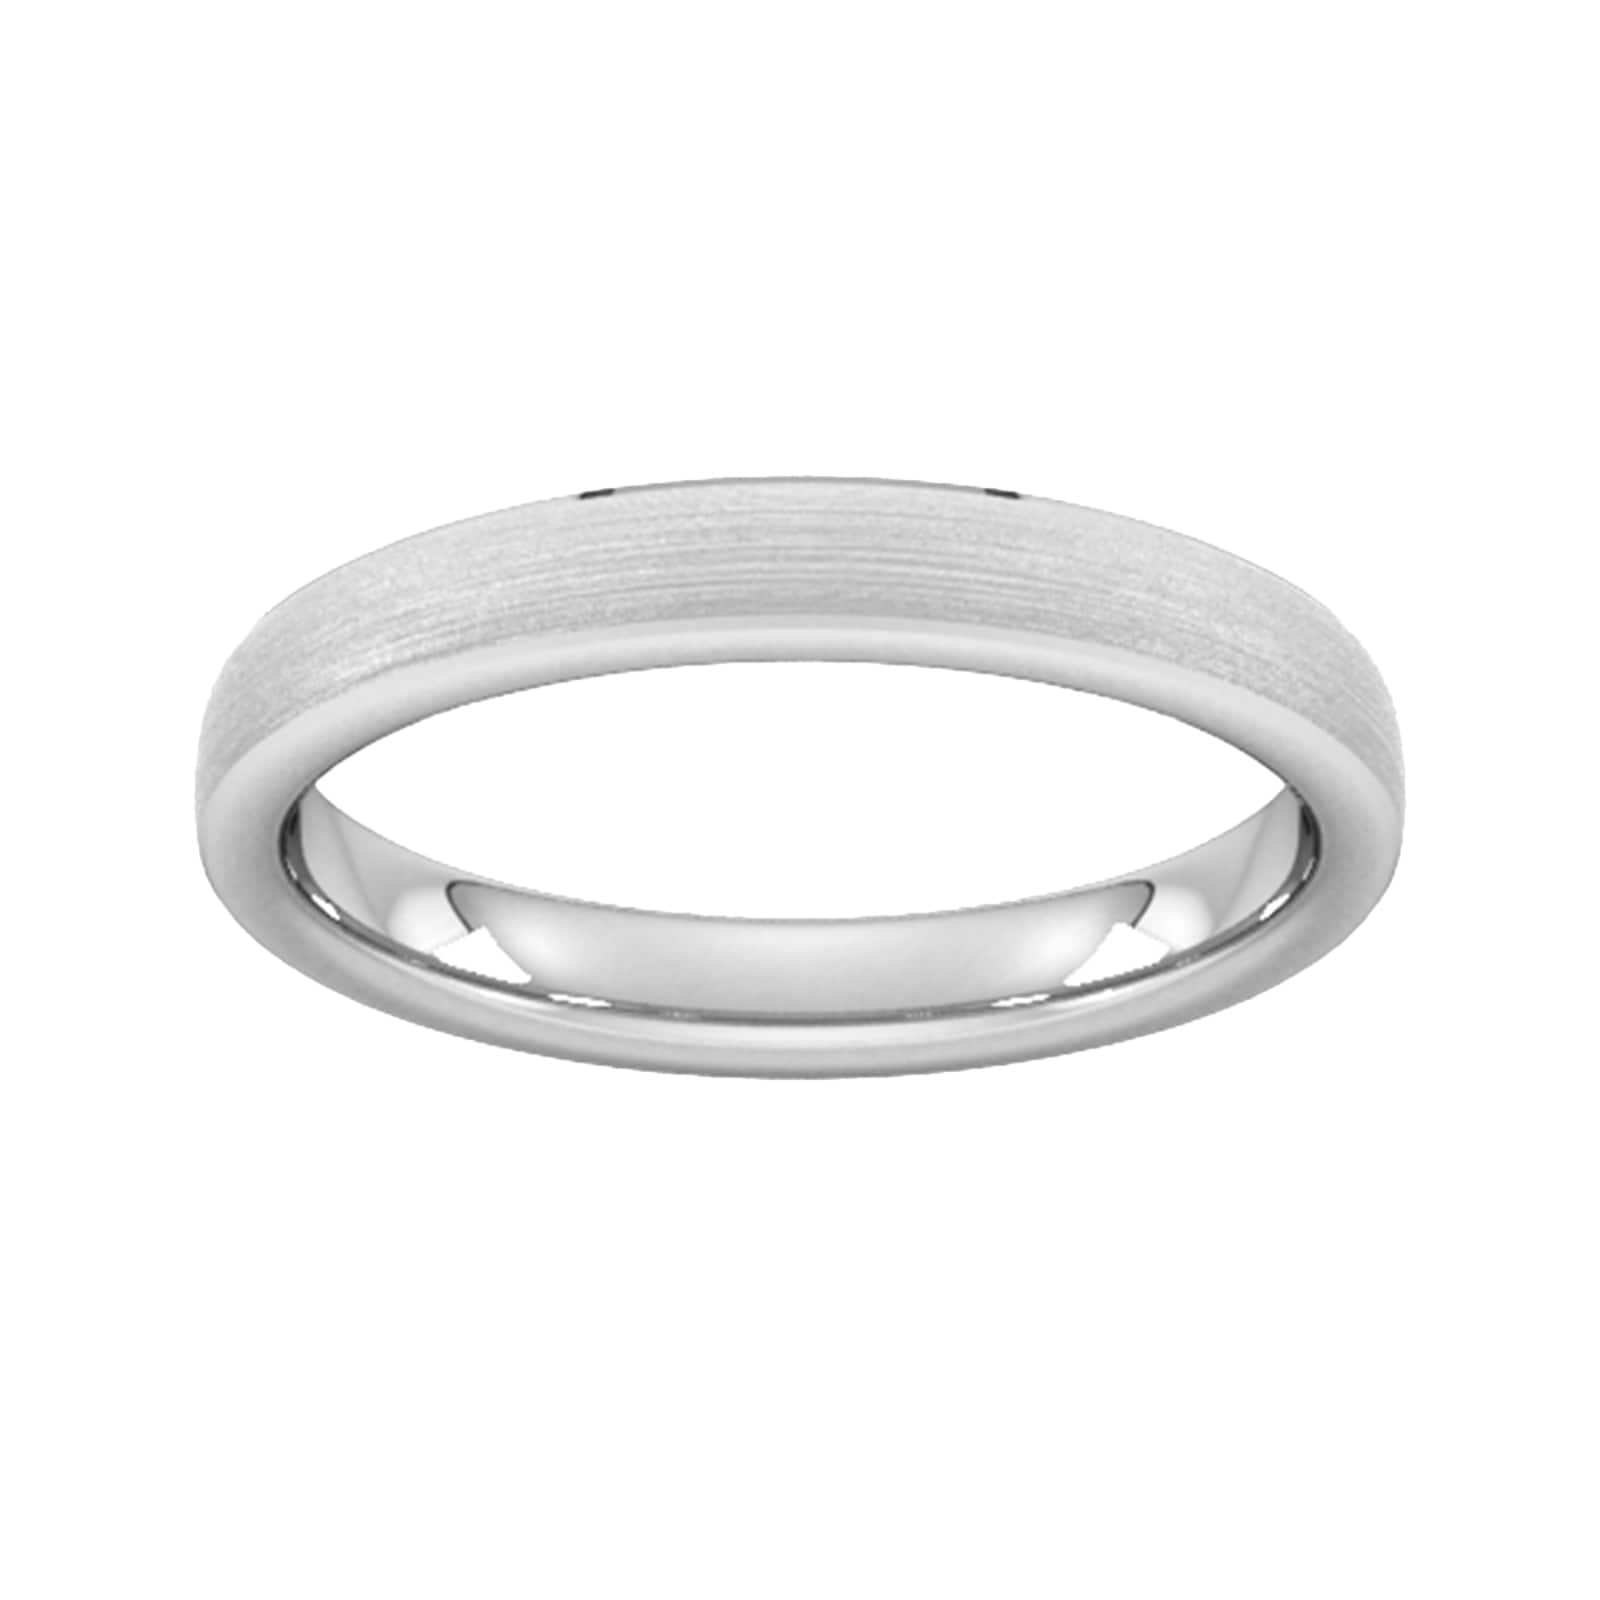 3mm Slight Court Standard Polished Chamfered Edges With Matt Centre Wedding Ring In Platinum - Ring Size M